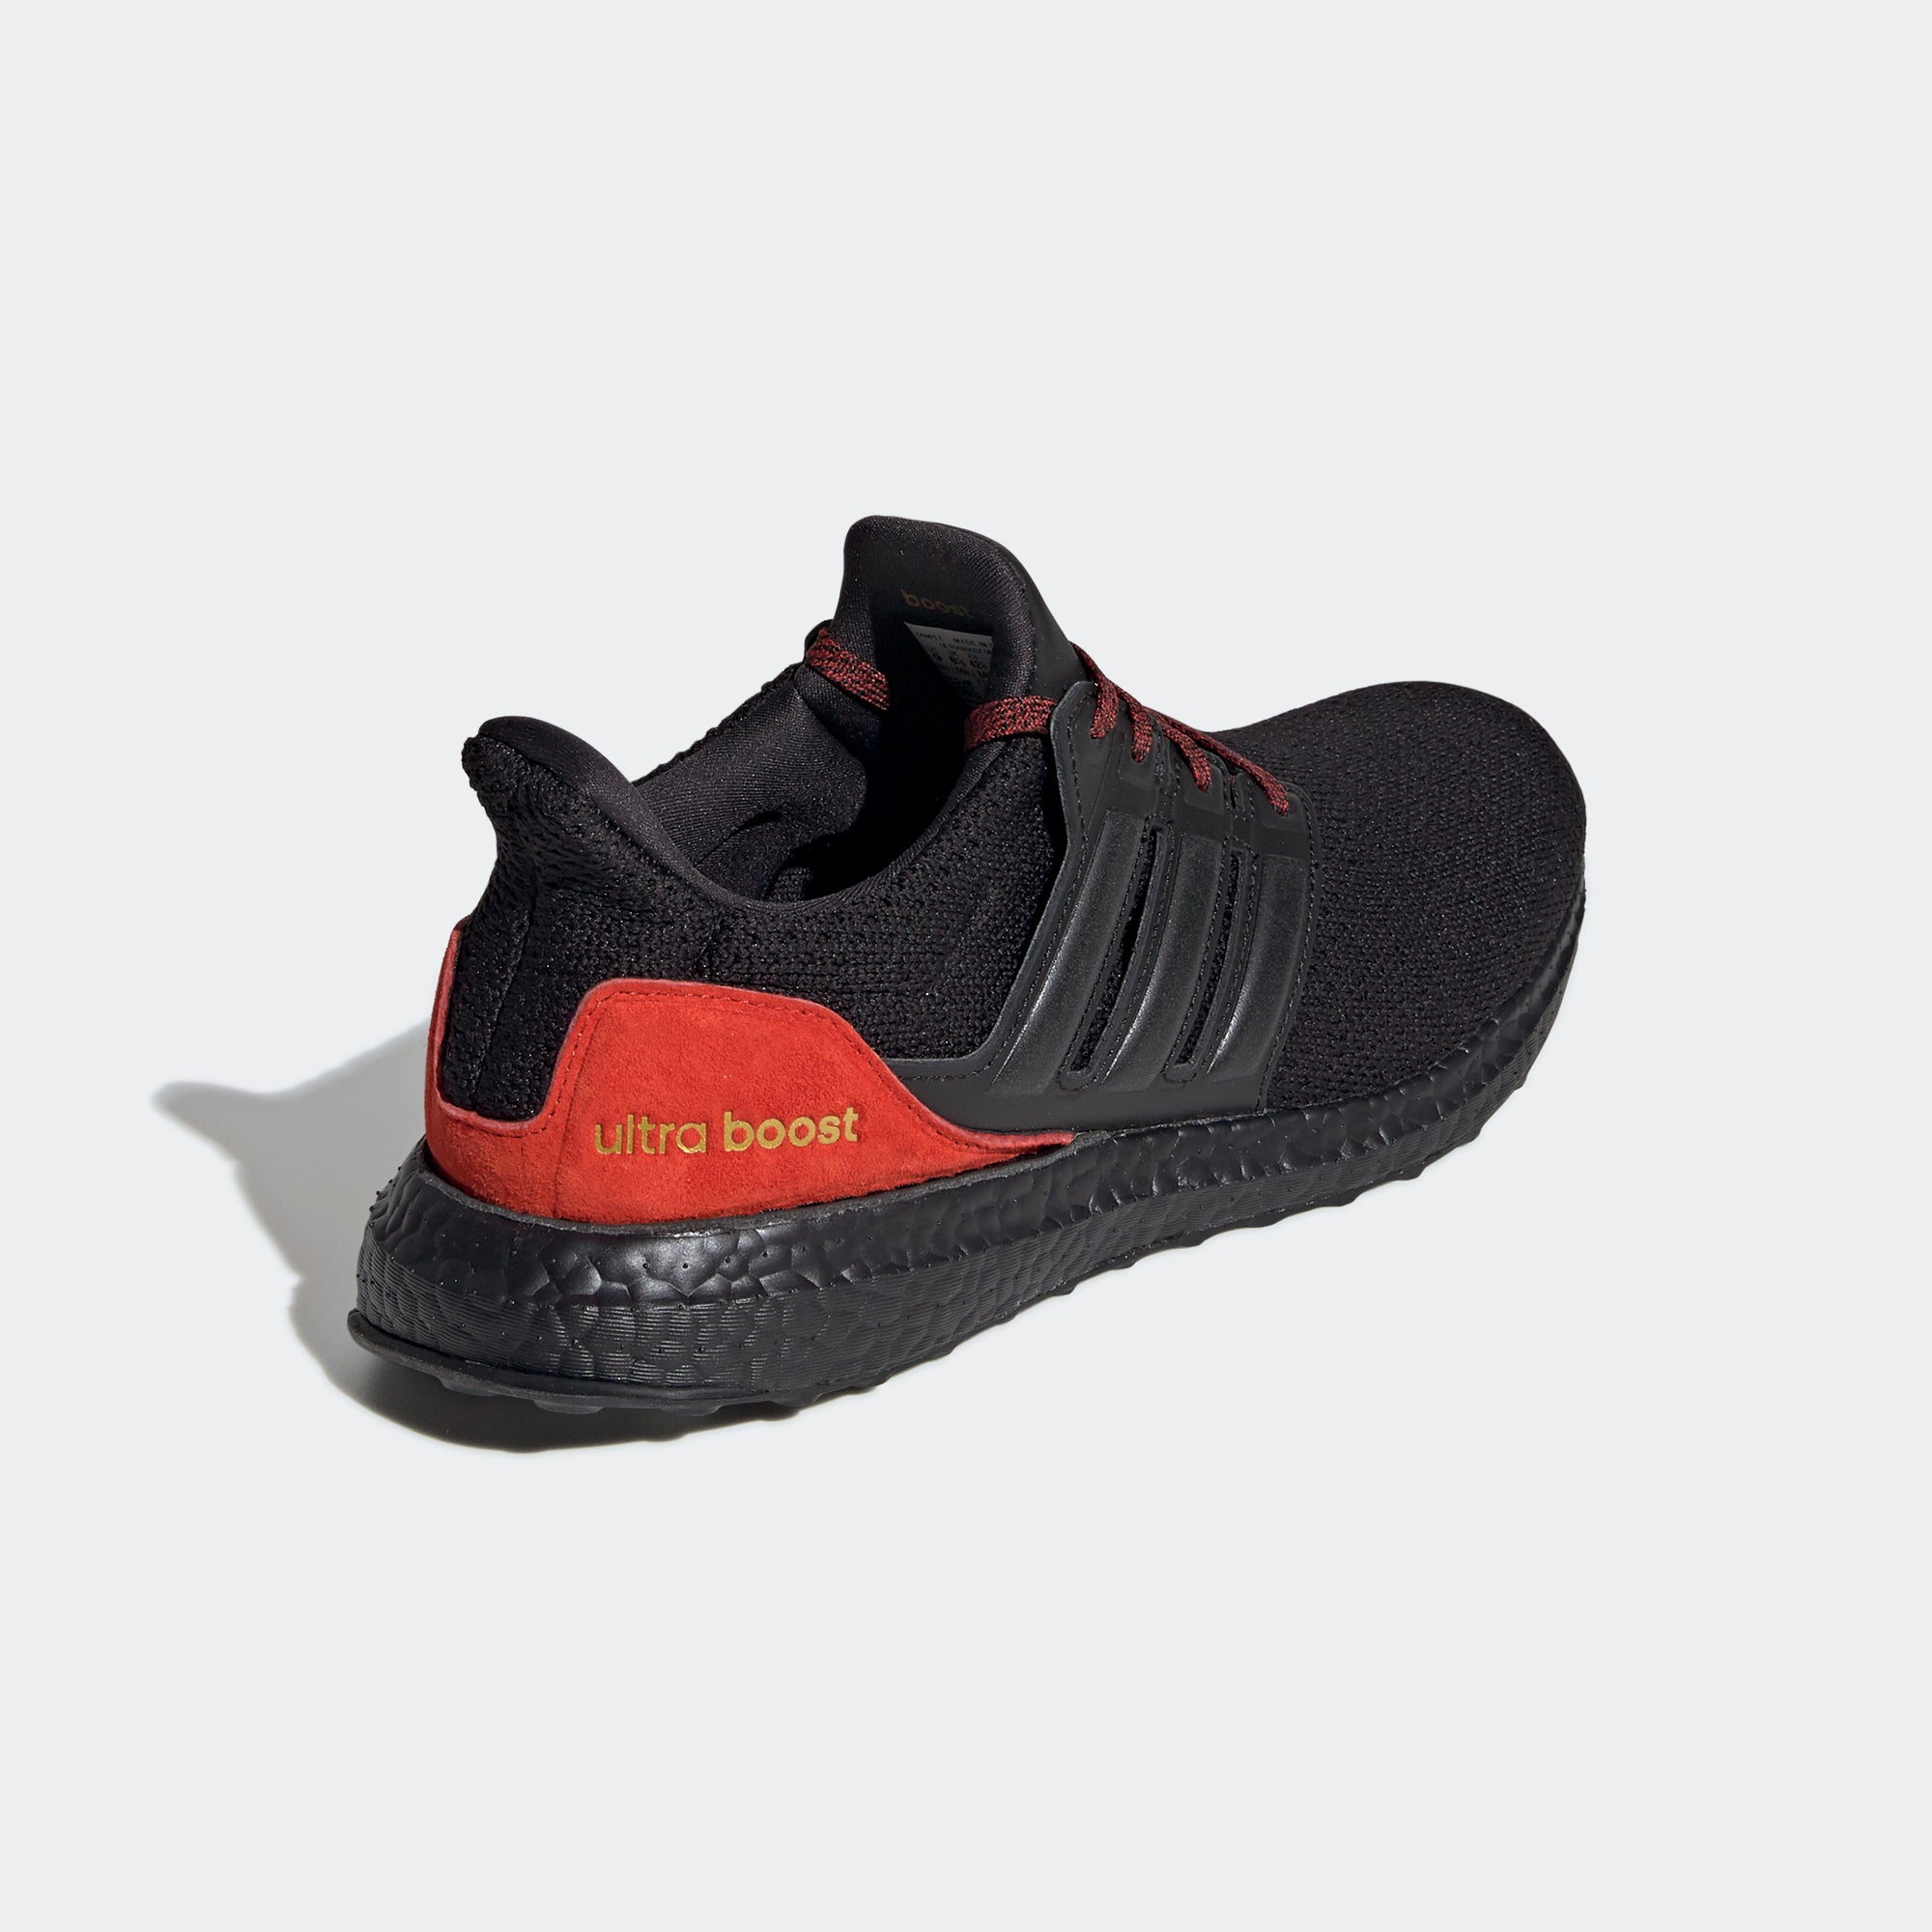 Adidas Ultraboost Dna Shoes Black Chicago City Sports